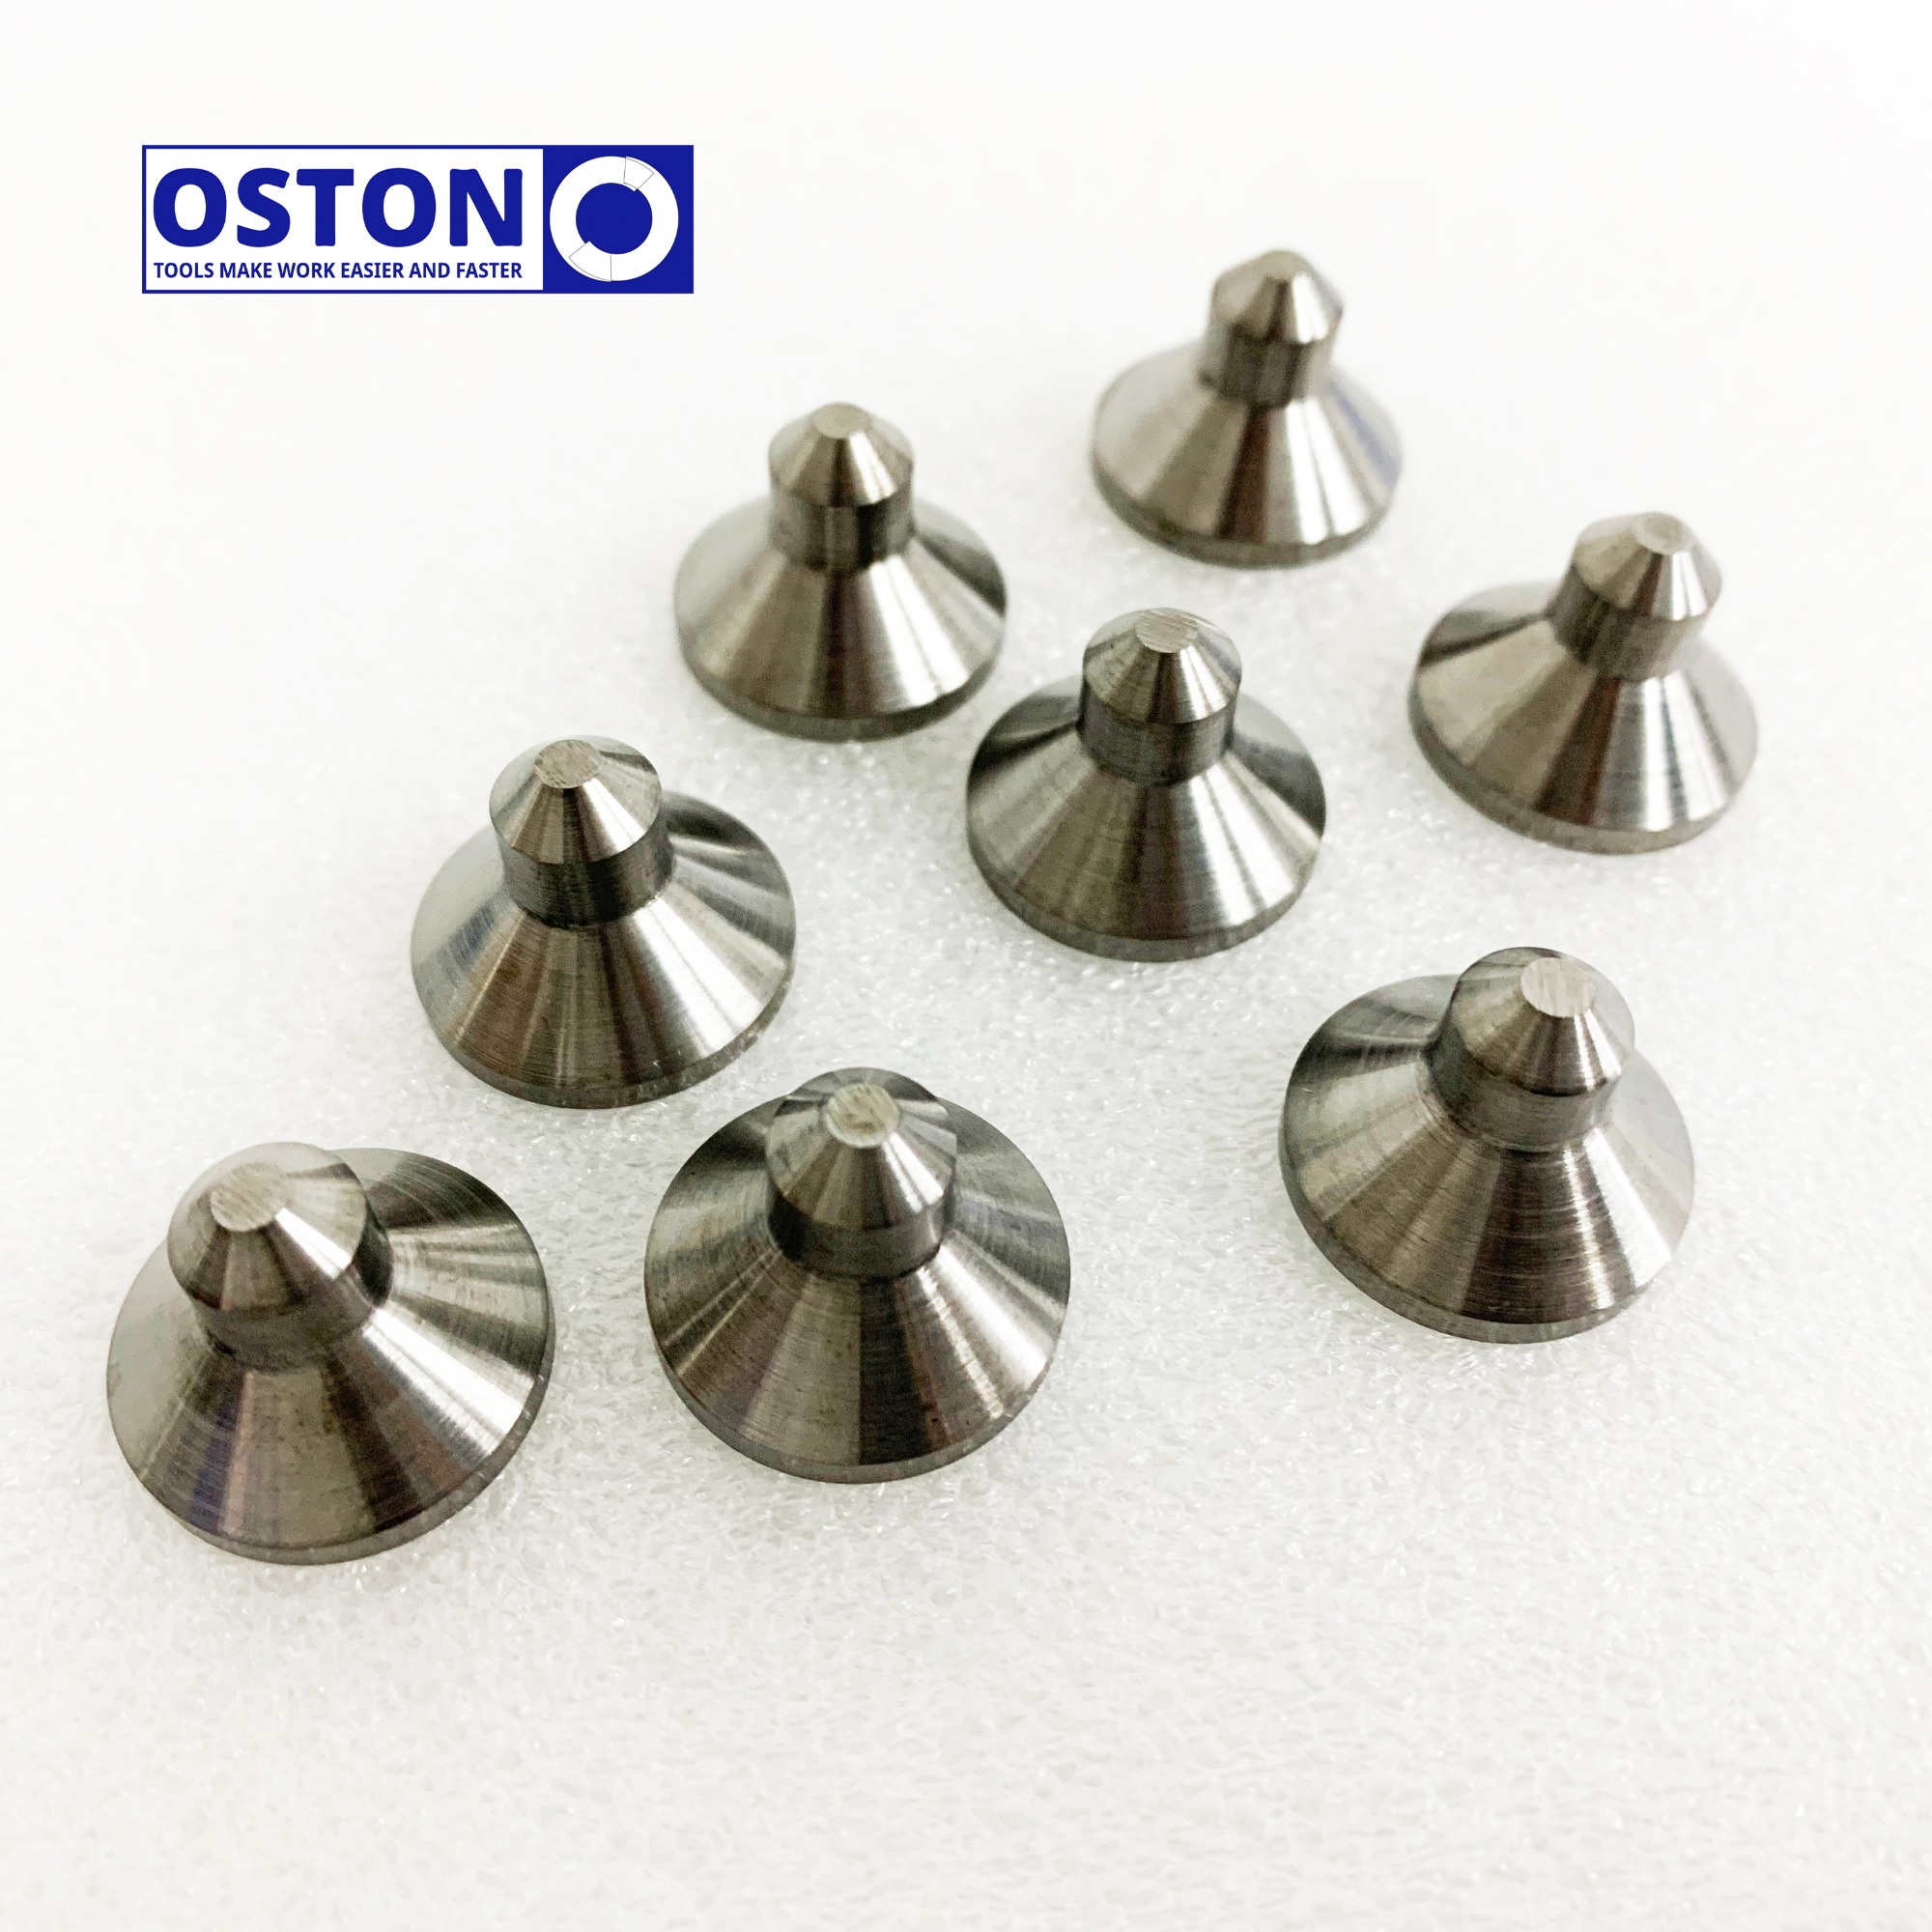 Tungsten Carbide Wear Parts for Valves and Pumps